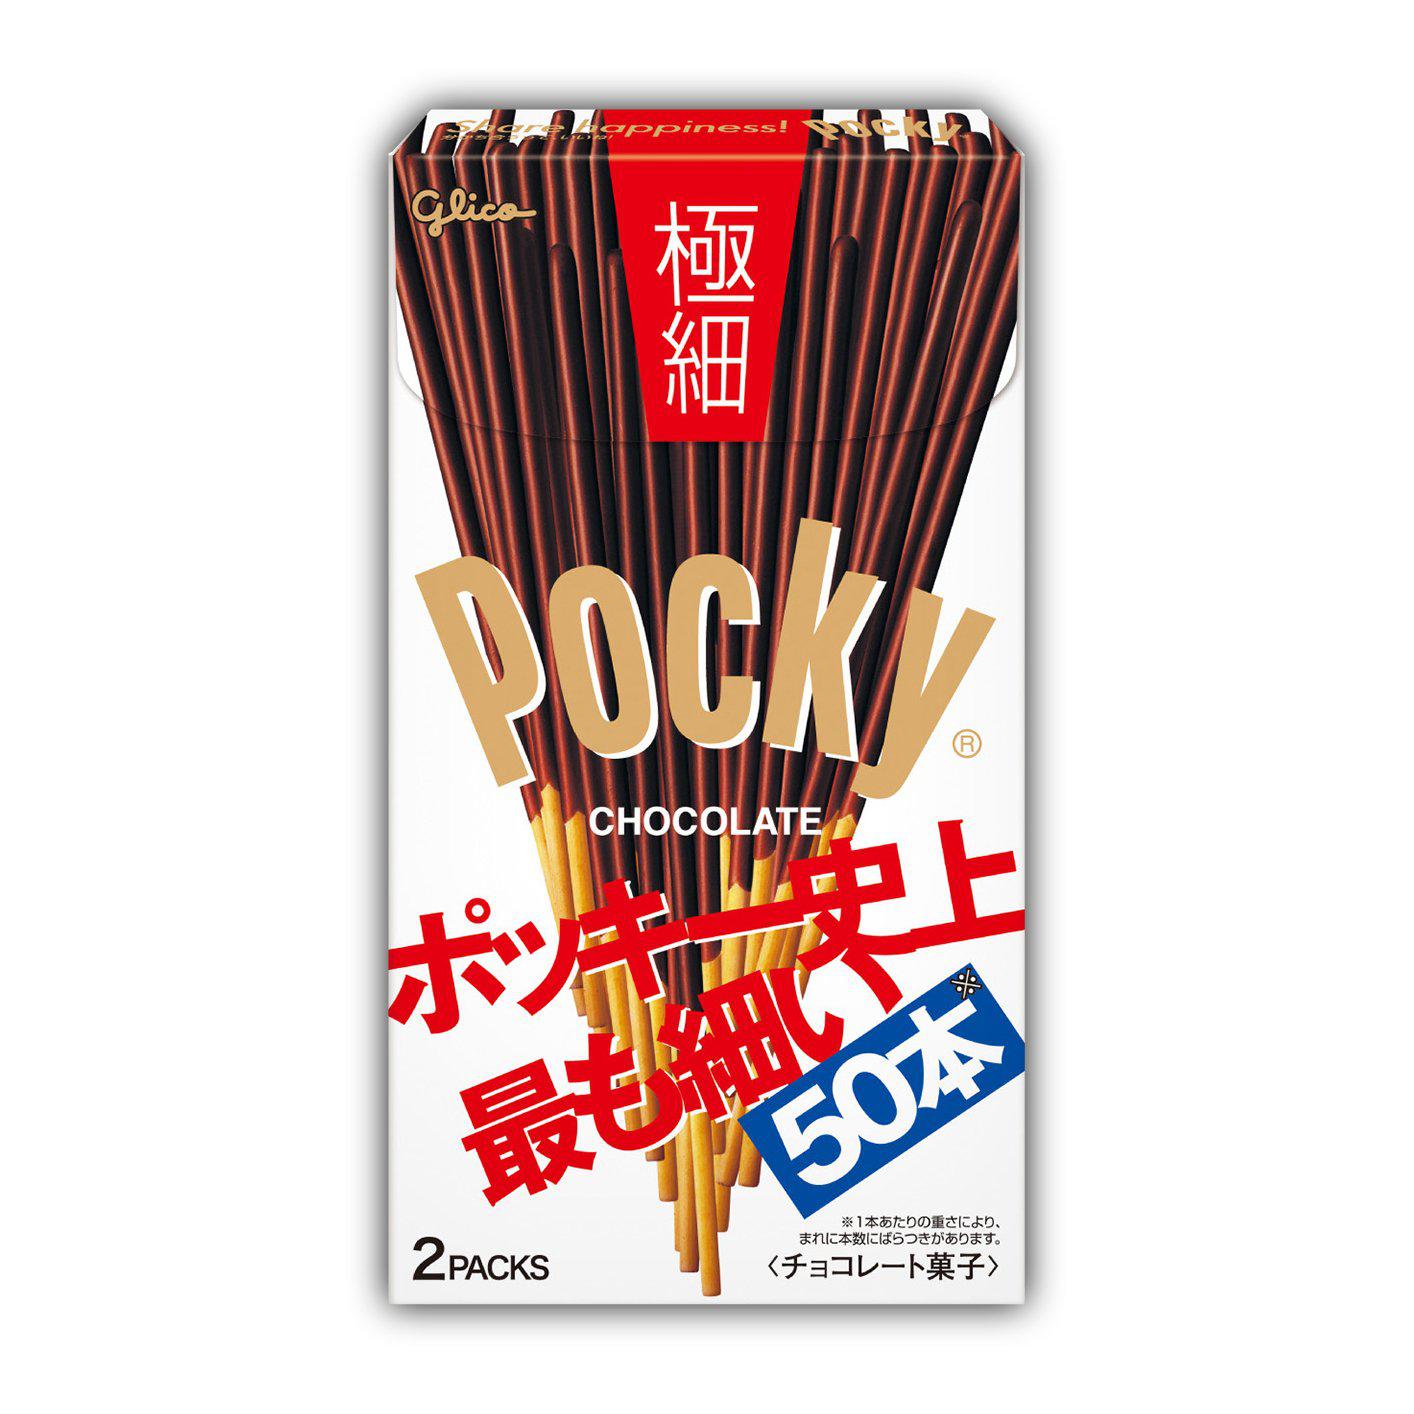 Pocky Gokuboso Thin Fine Chocolate Covered Biscuit Sticks (Pack of 3)